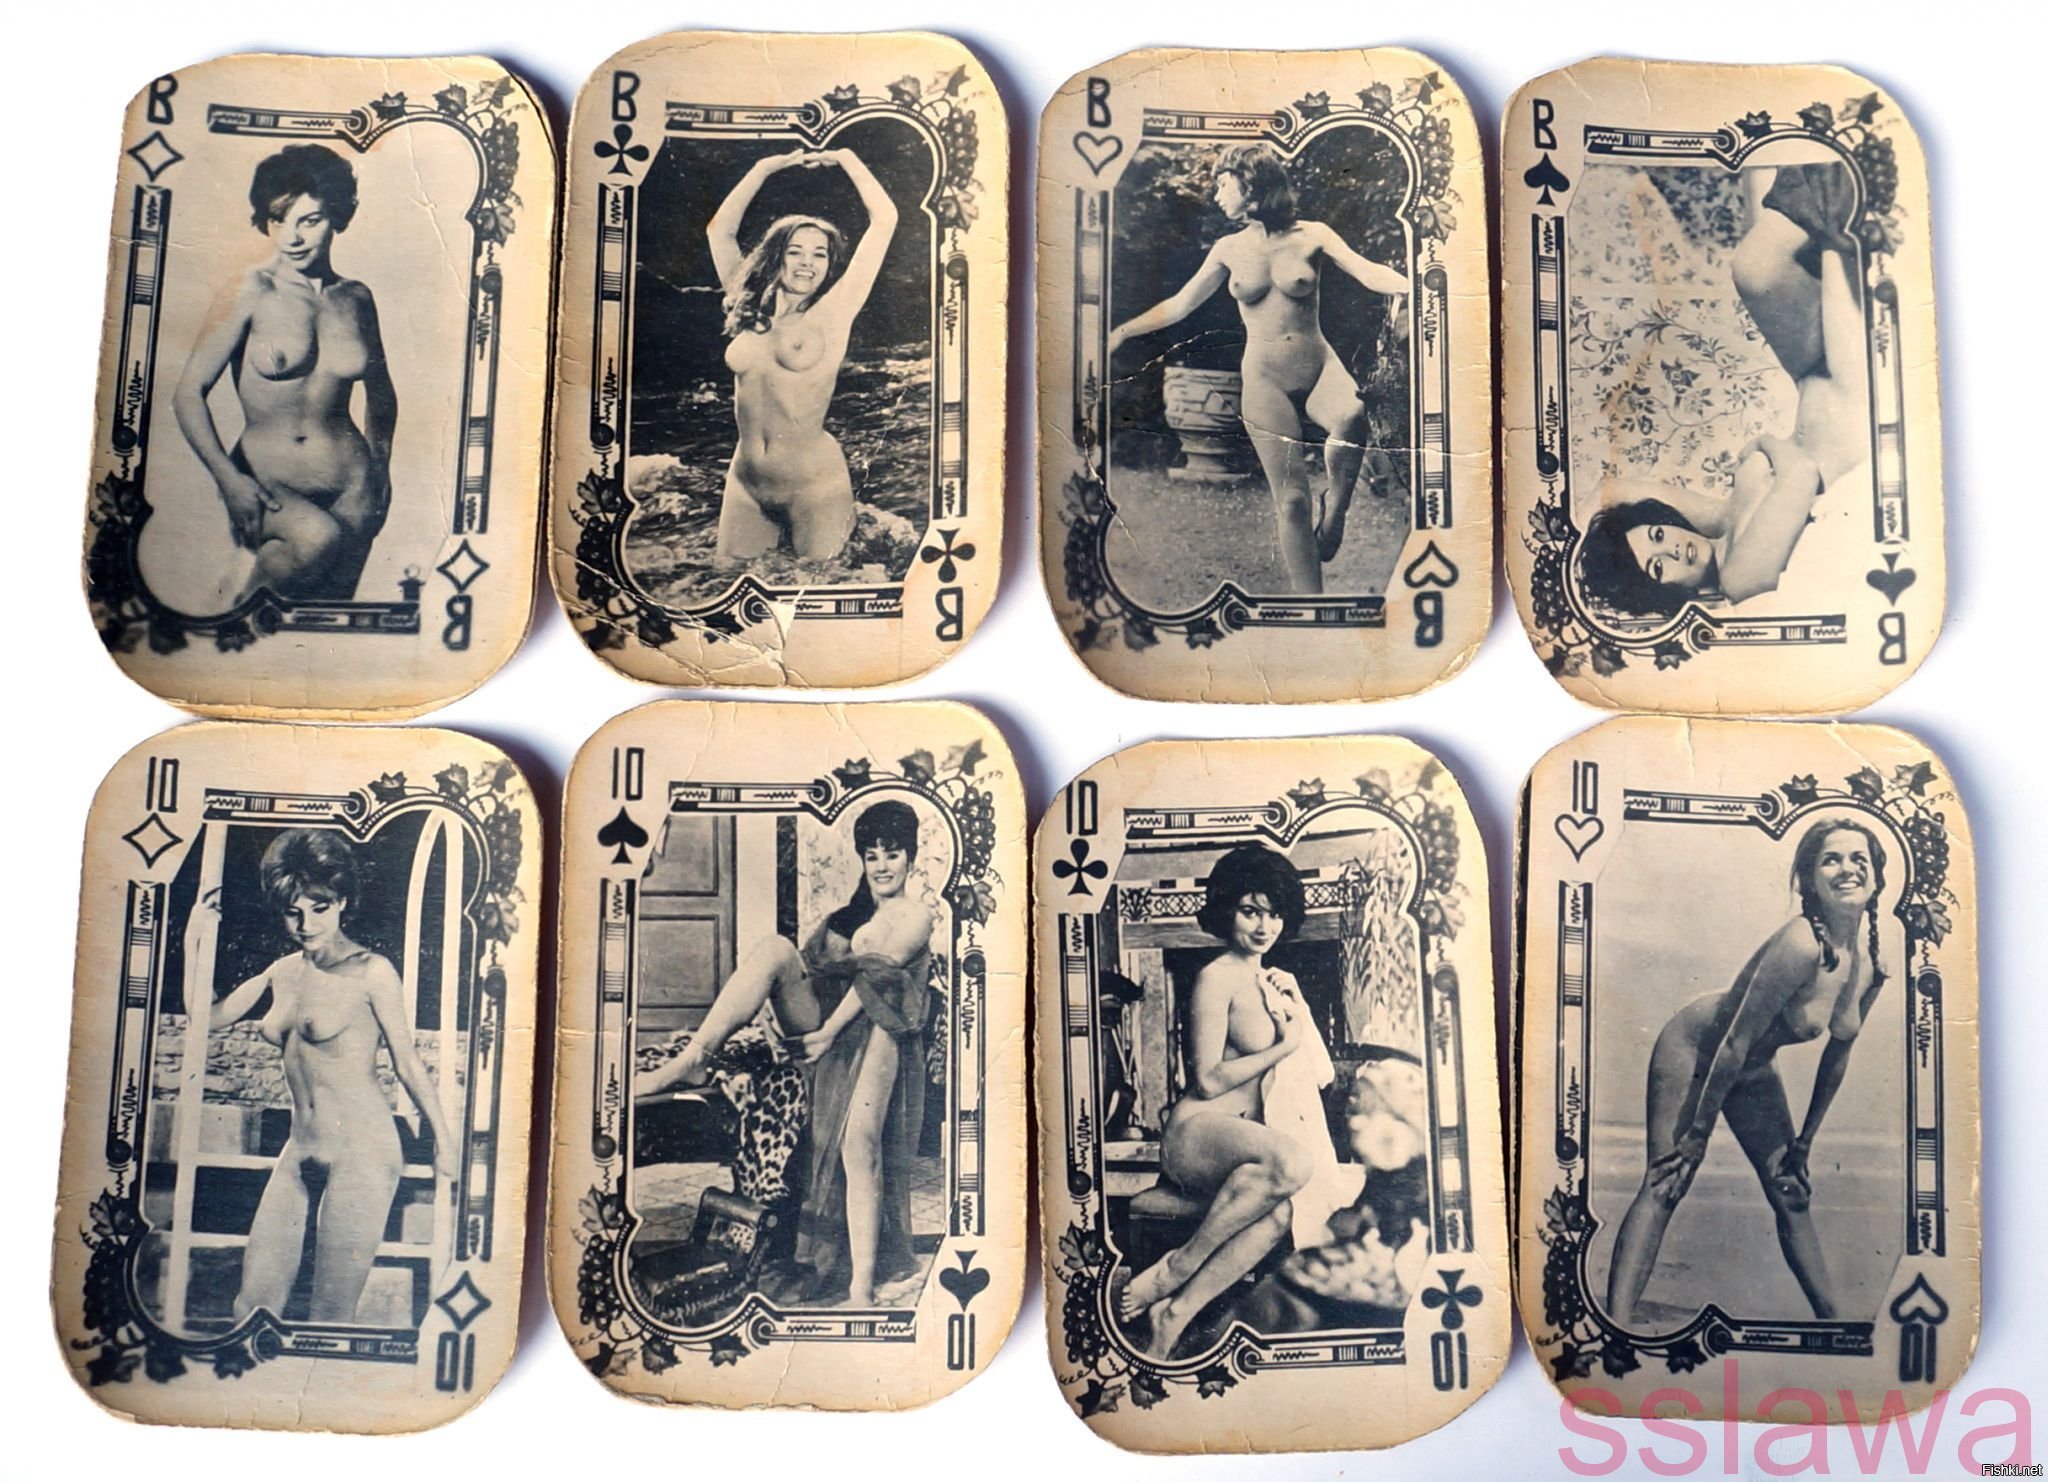 Adult trading cards